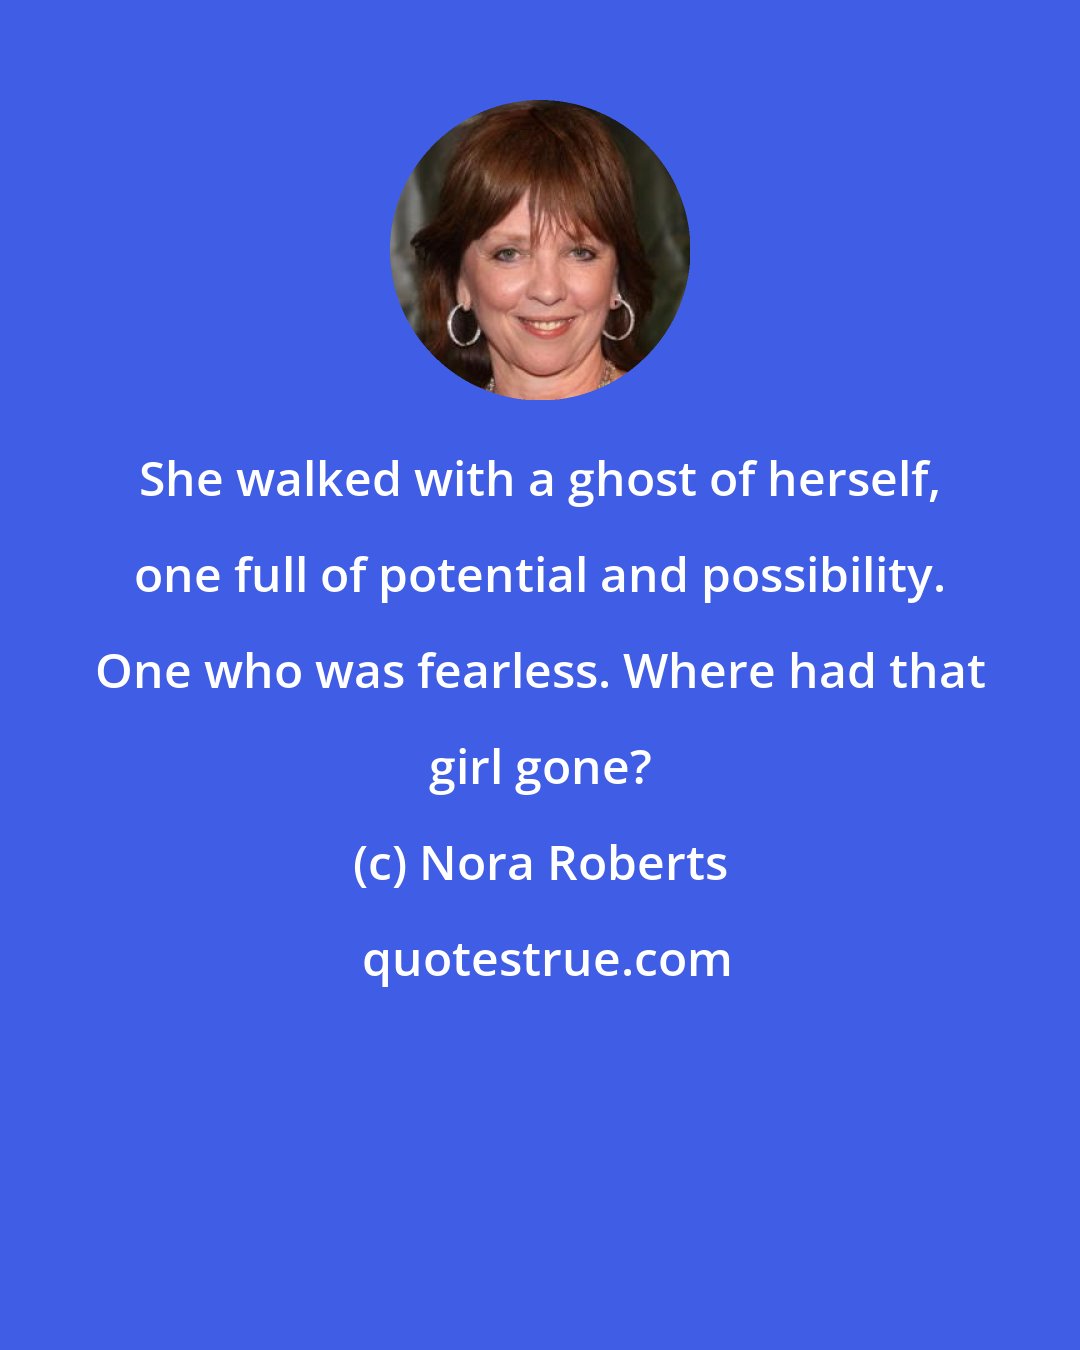 Nora Roberts: She walked with a ghost of herself, one full of potential and possibility. One who was fearless. Where had that girl gone?